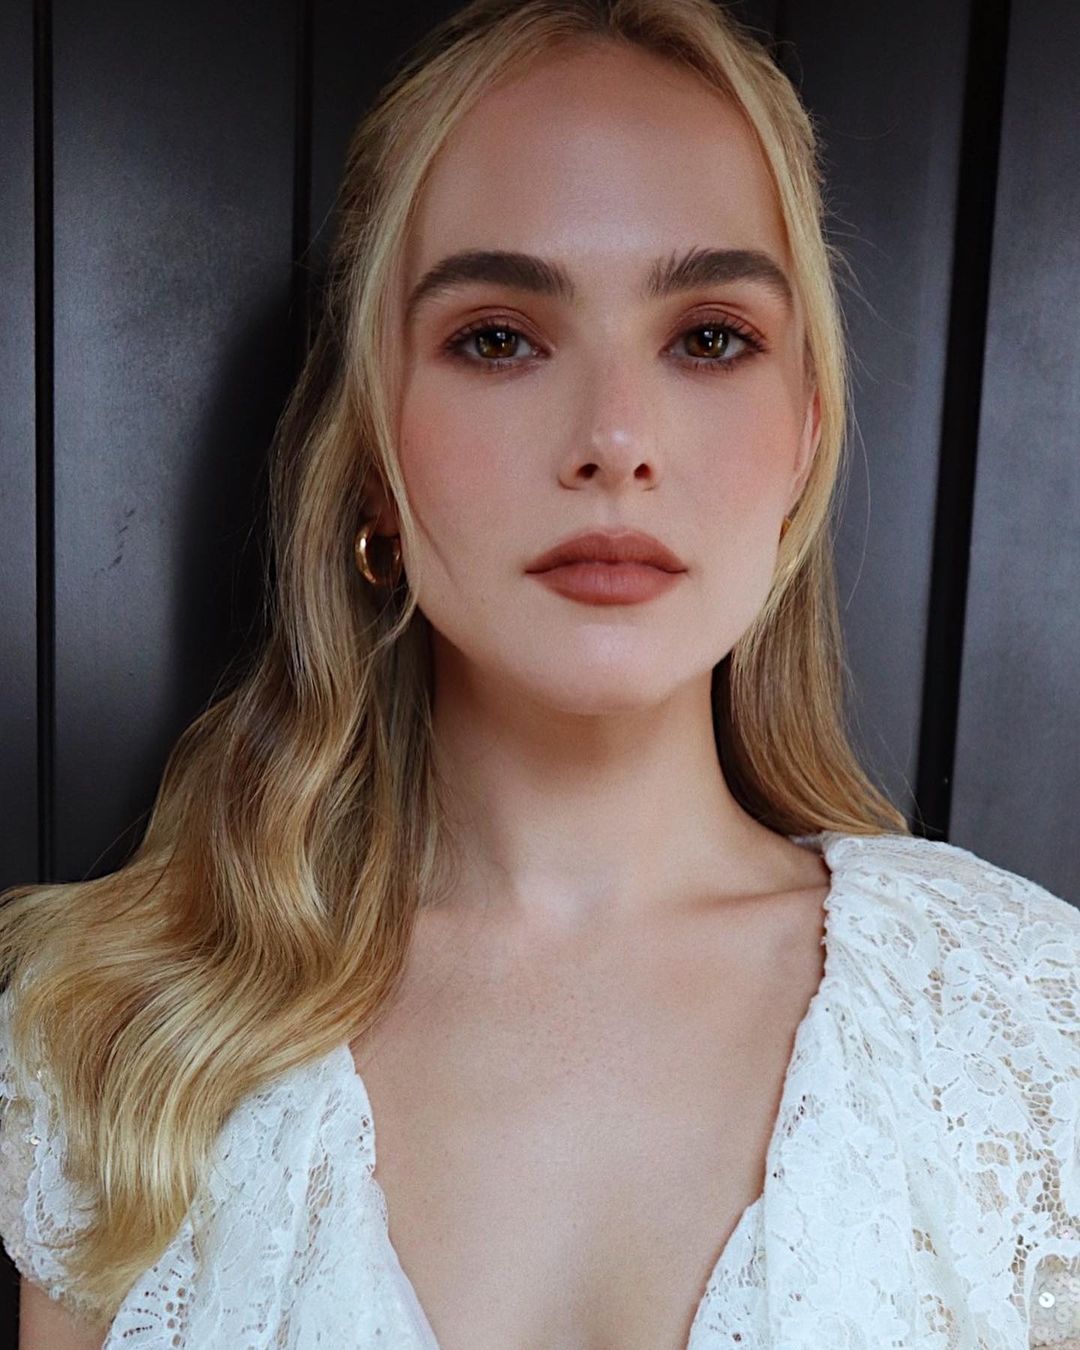 Zoey Deutch West Age, Height, Wife, Family – Biographyprofiles